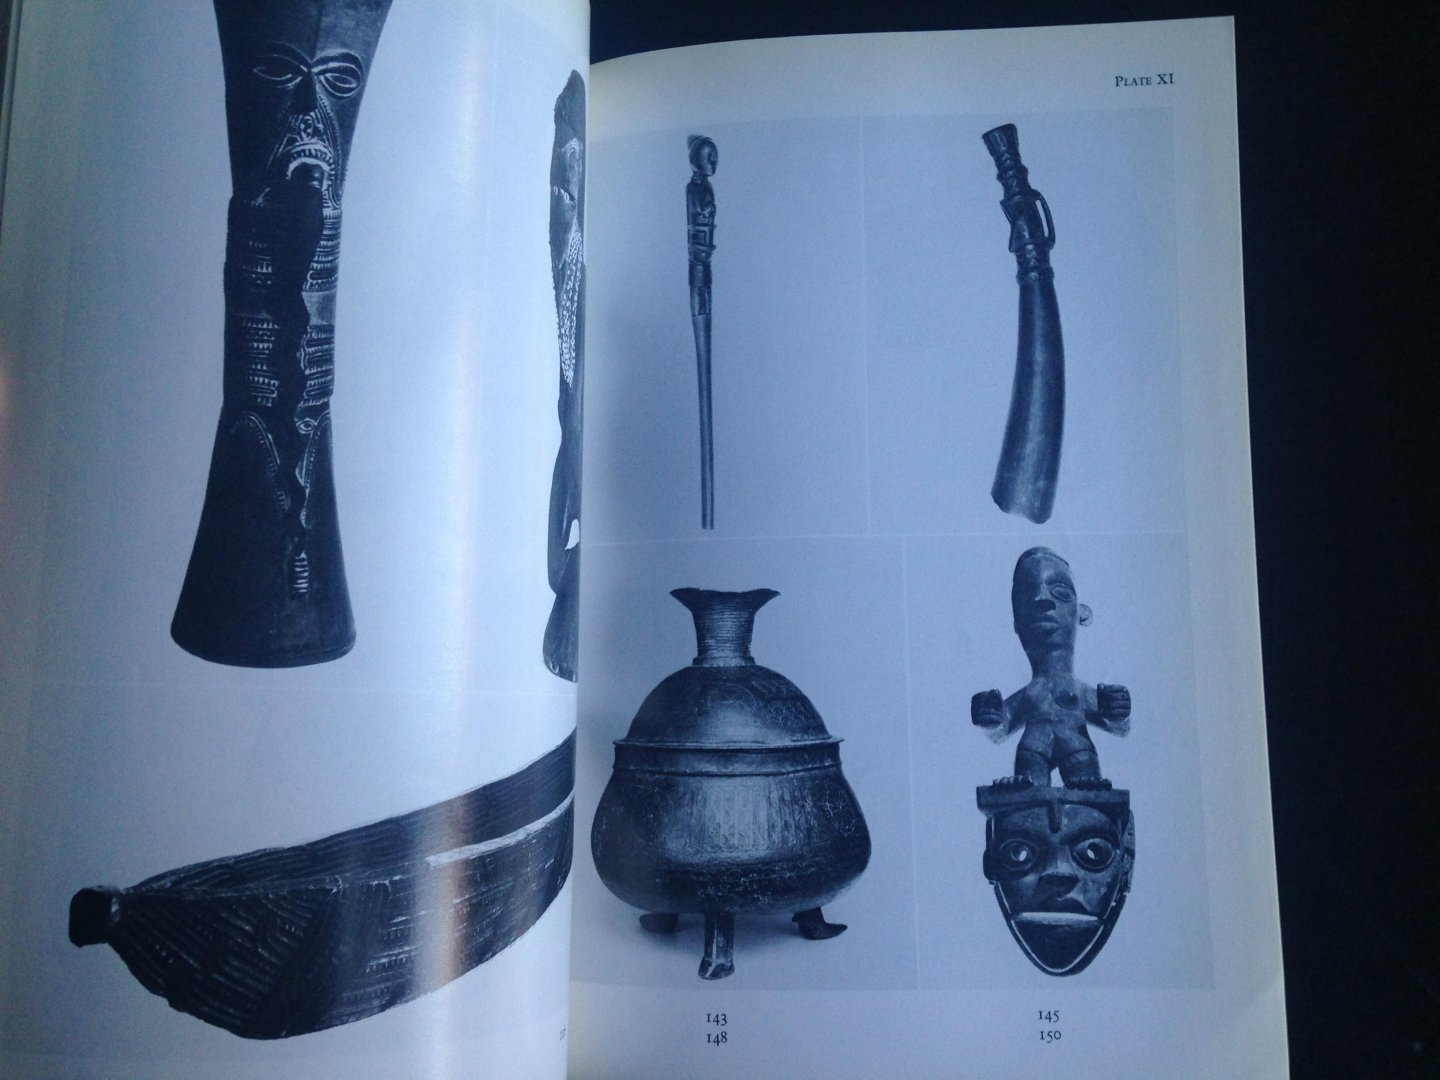 Catalogue Sotheby - Pre-Columbian, American Indian, Oceanic and African Art